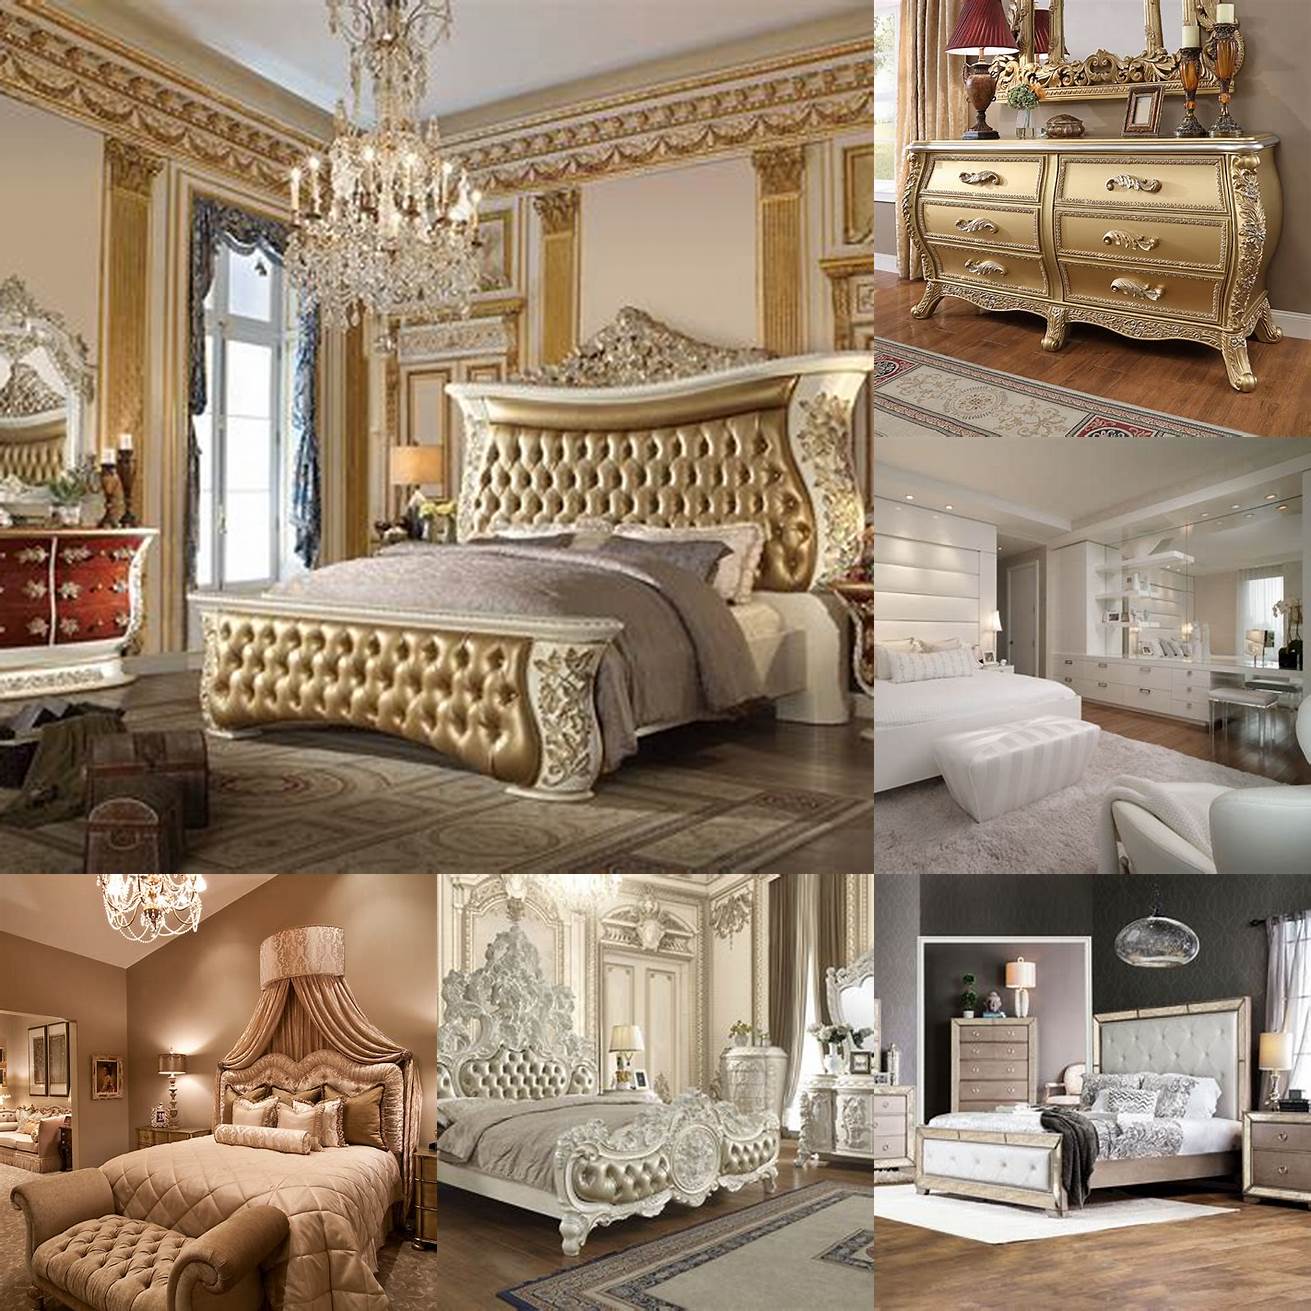 A Glamorous Bedroom